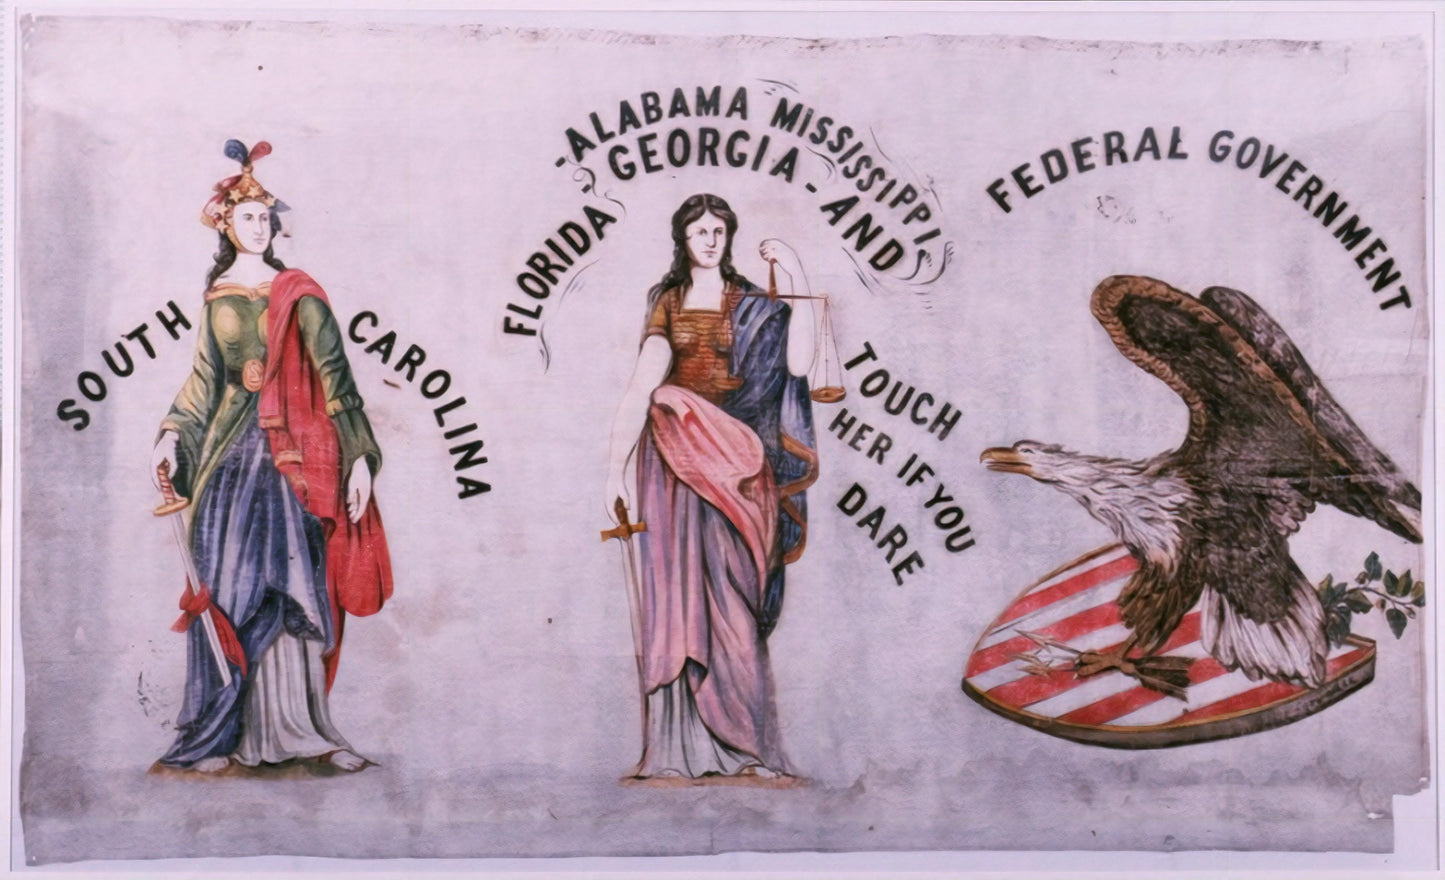 "Touch her if you dare" 1860 Georgia Secession Banner House Flag